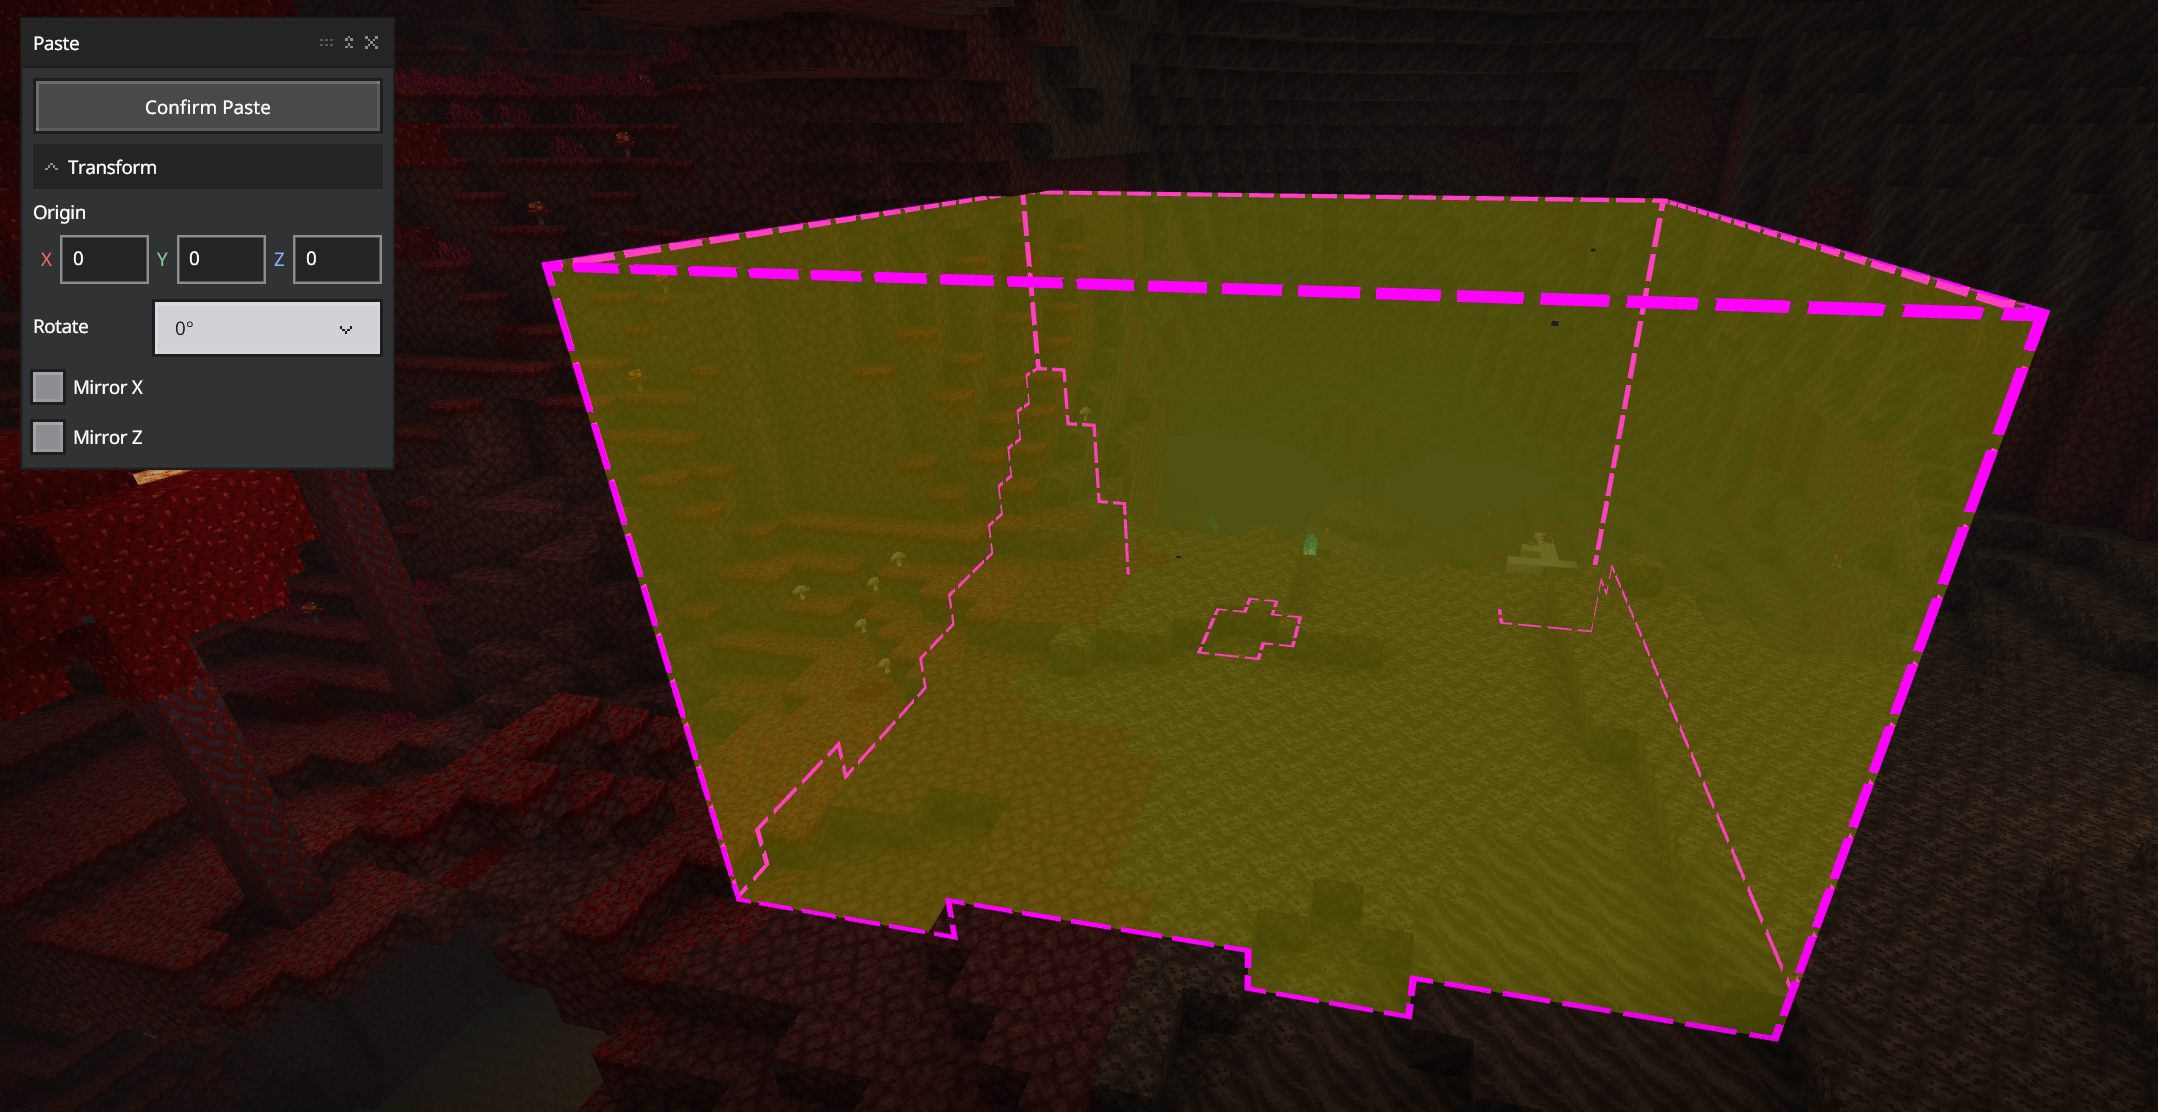 Image of a paste preview in the Nether